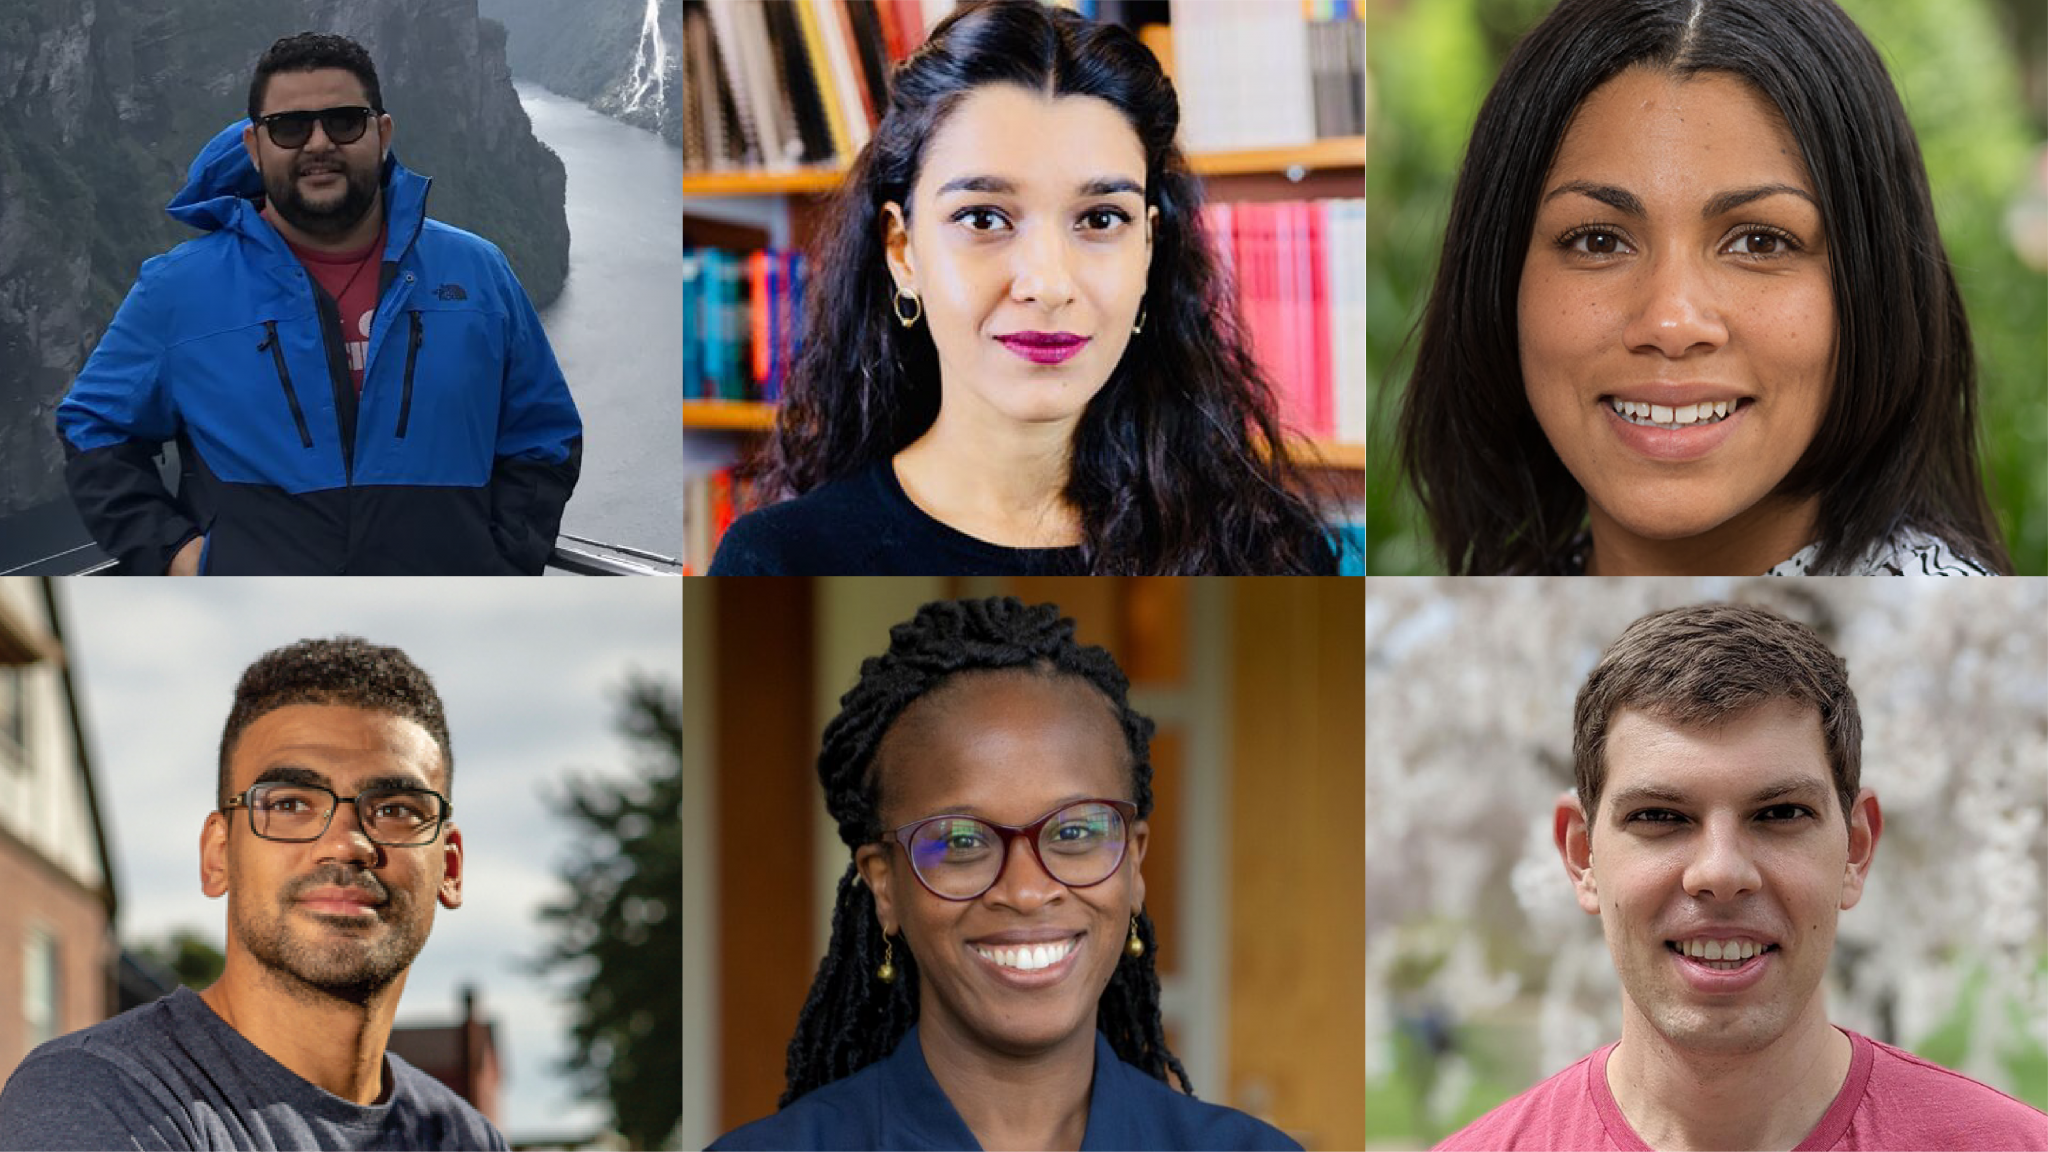 Among the newest faculty hired by College of Arts & Sciences departments are, top row, left to right, Kennet Flores, Aalyia Sadruddin a and Malia Blue; bottom row, Gabriel Bump, Fenaba Addo and Gedas Bertasius.